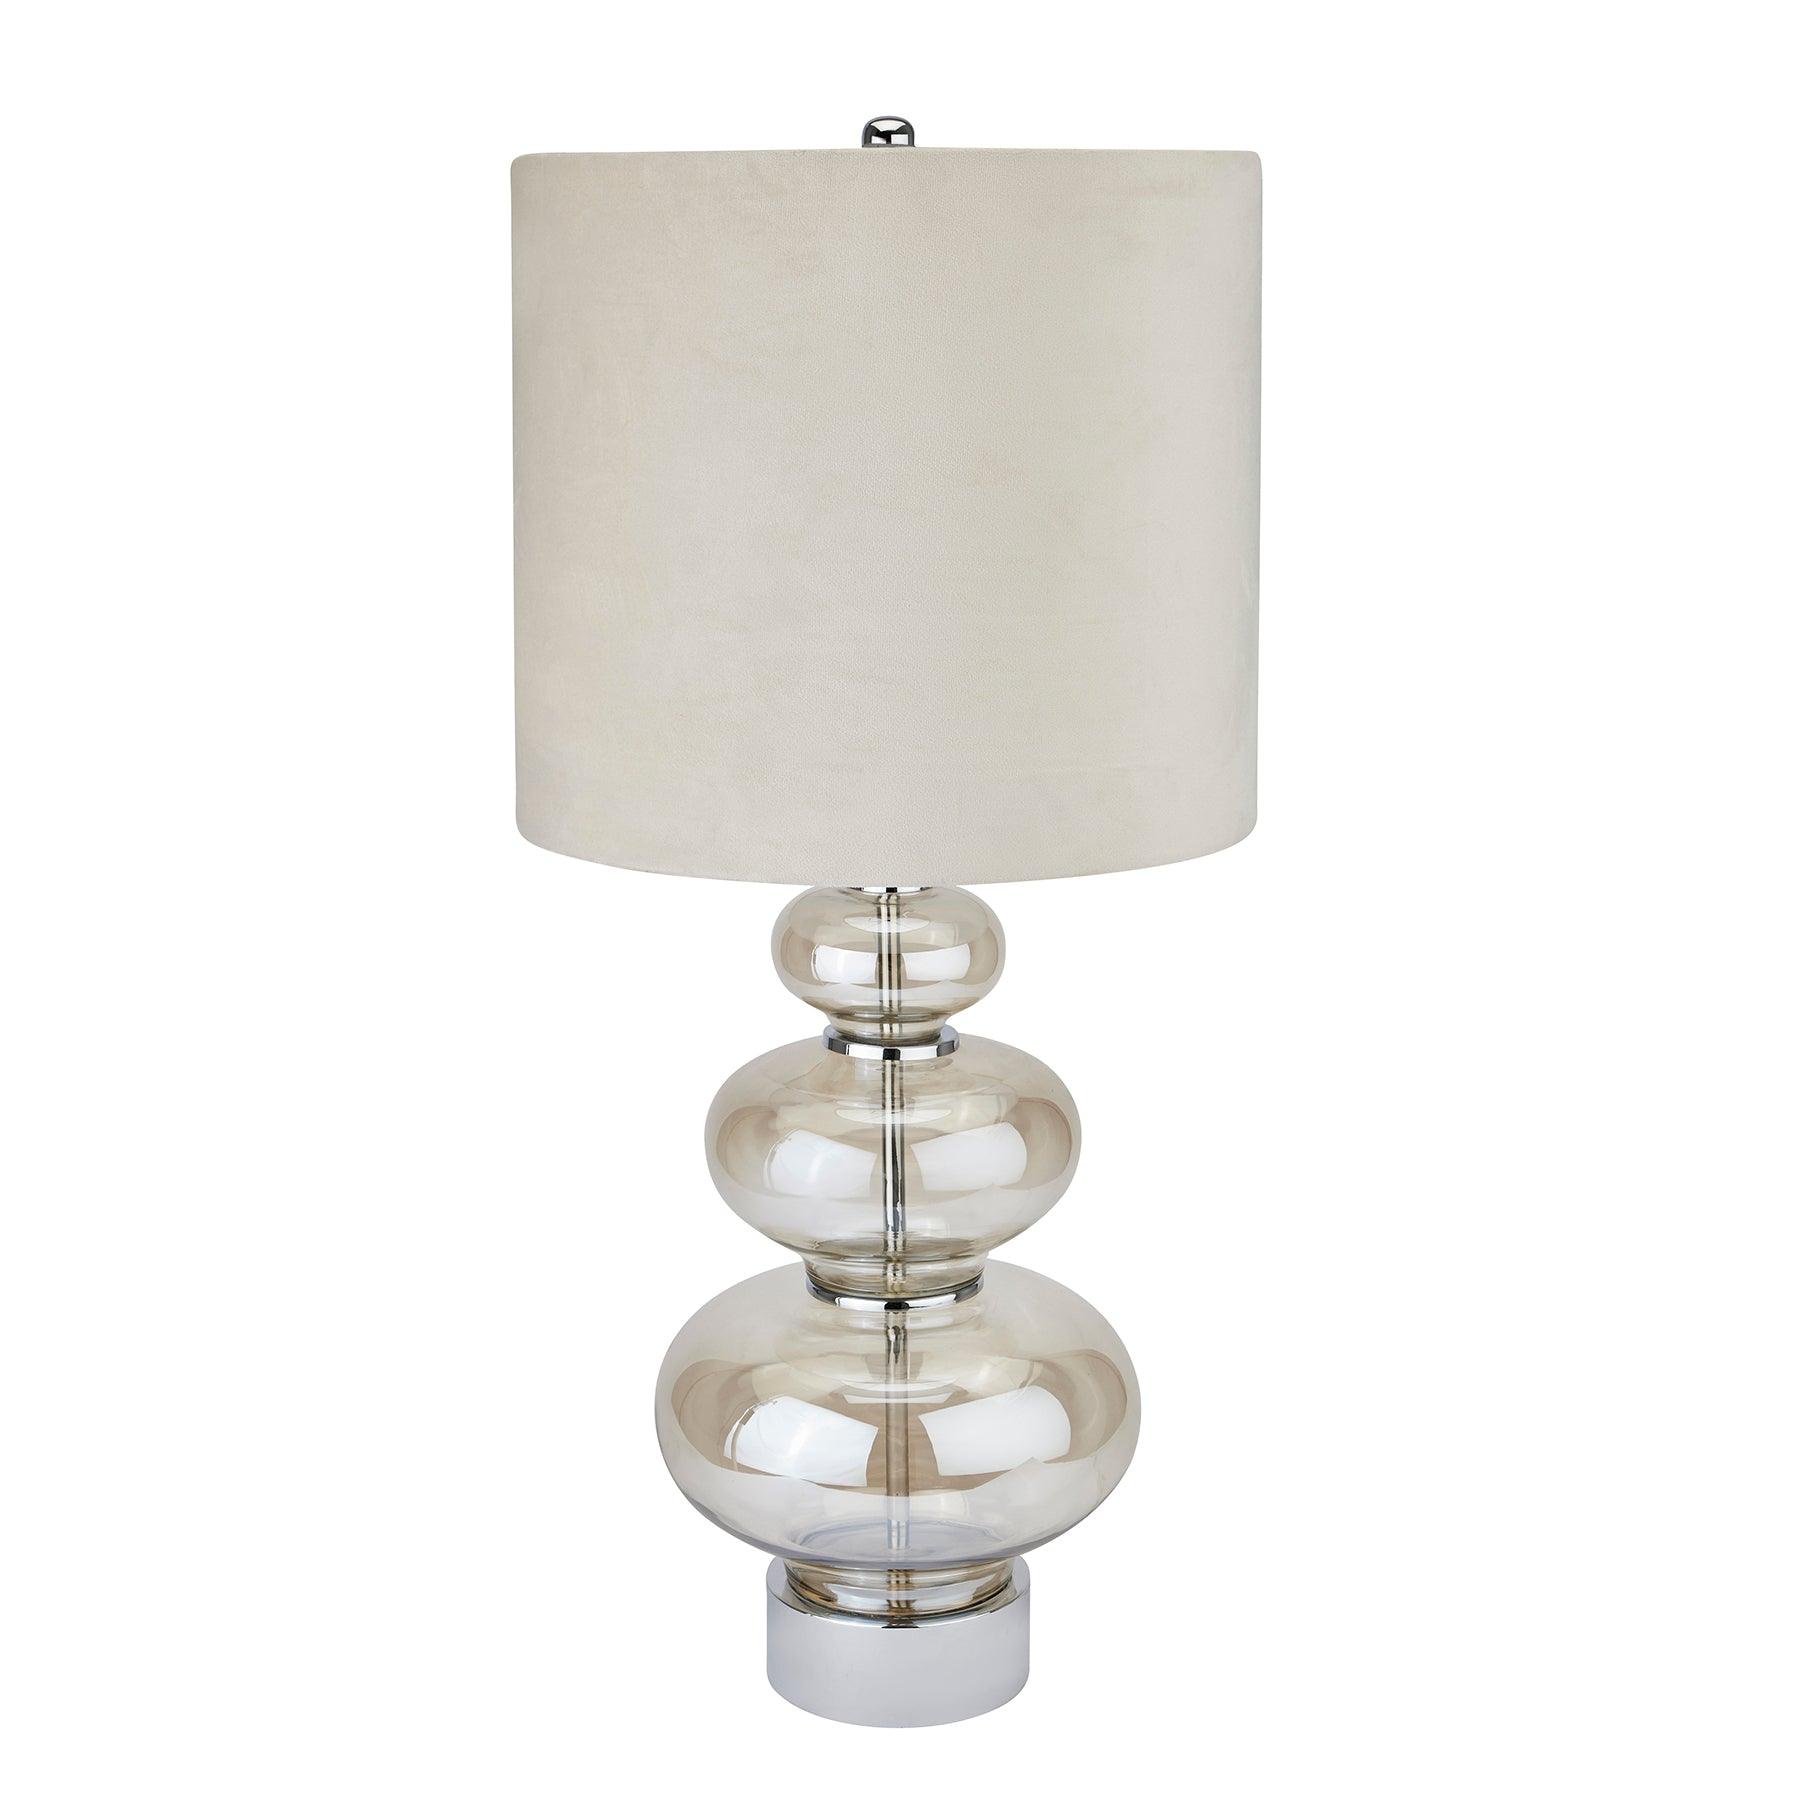 View Justicia Metallic Glass Lamp With Velvet Shade information